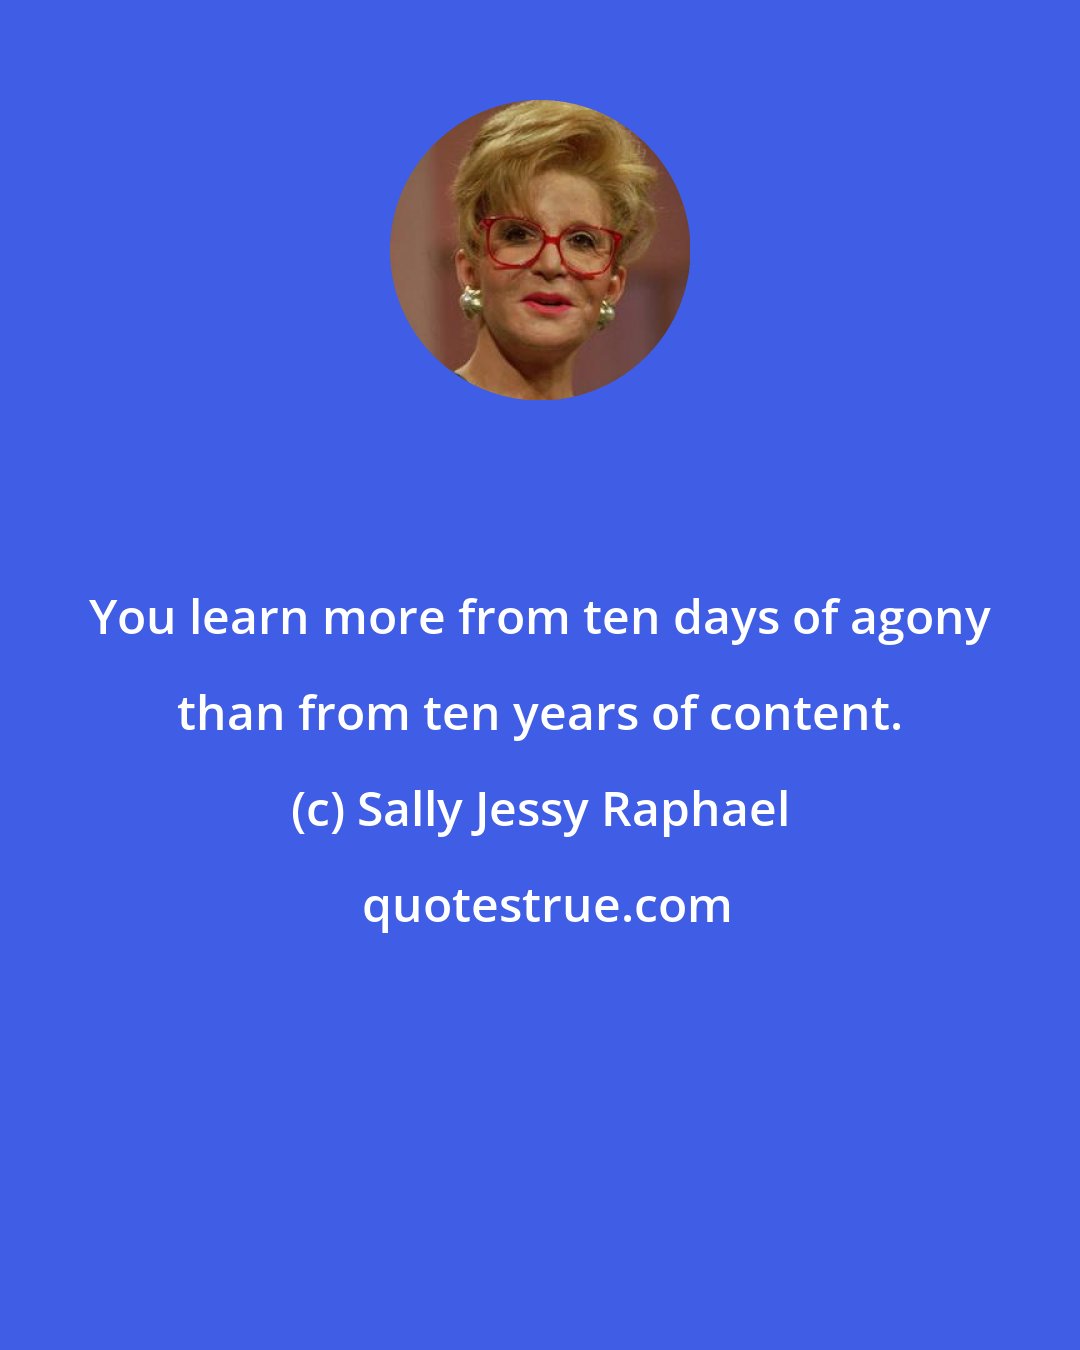 Sally Jessy Raphael: You learn more from ten days of agony than from ten years of content.